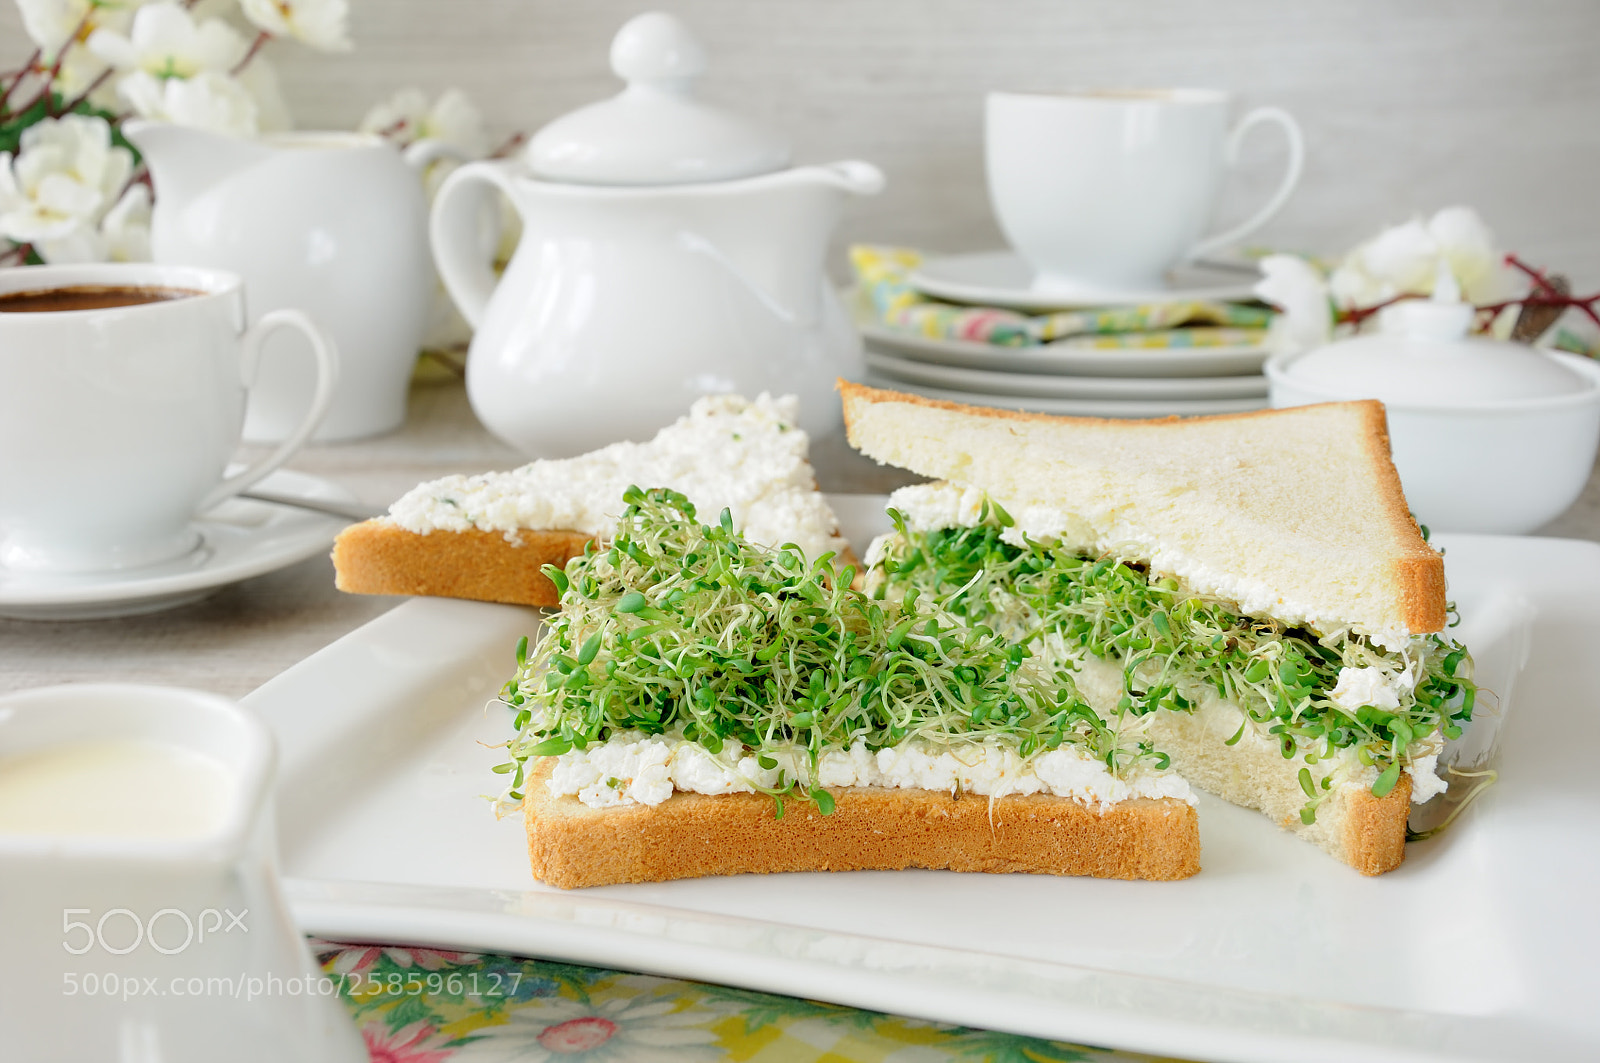 Nikon D90 sample photo. Sandwich with ricotta and photography